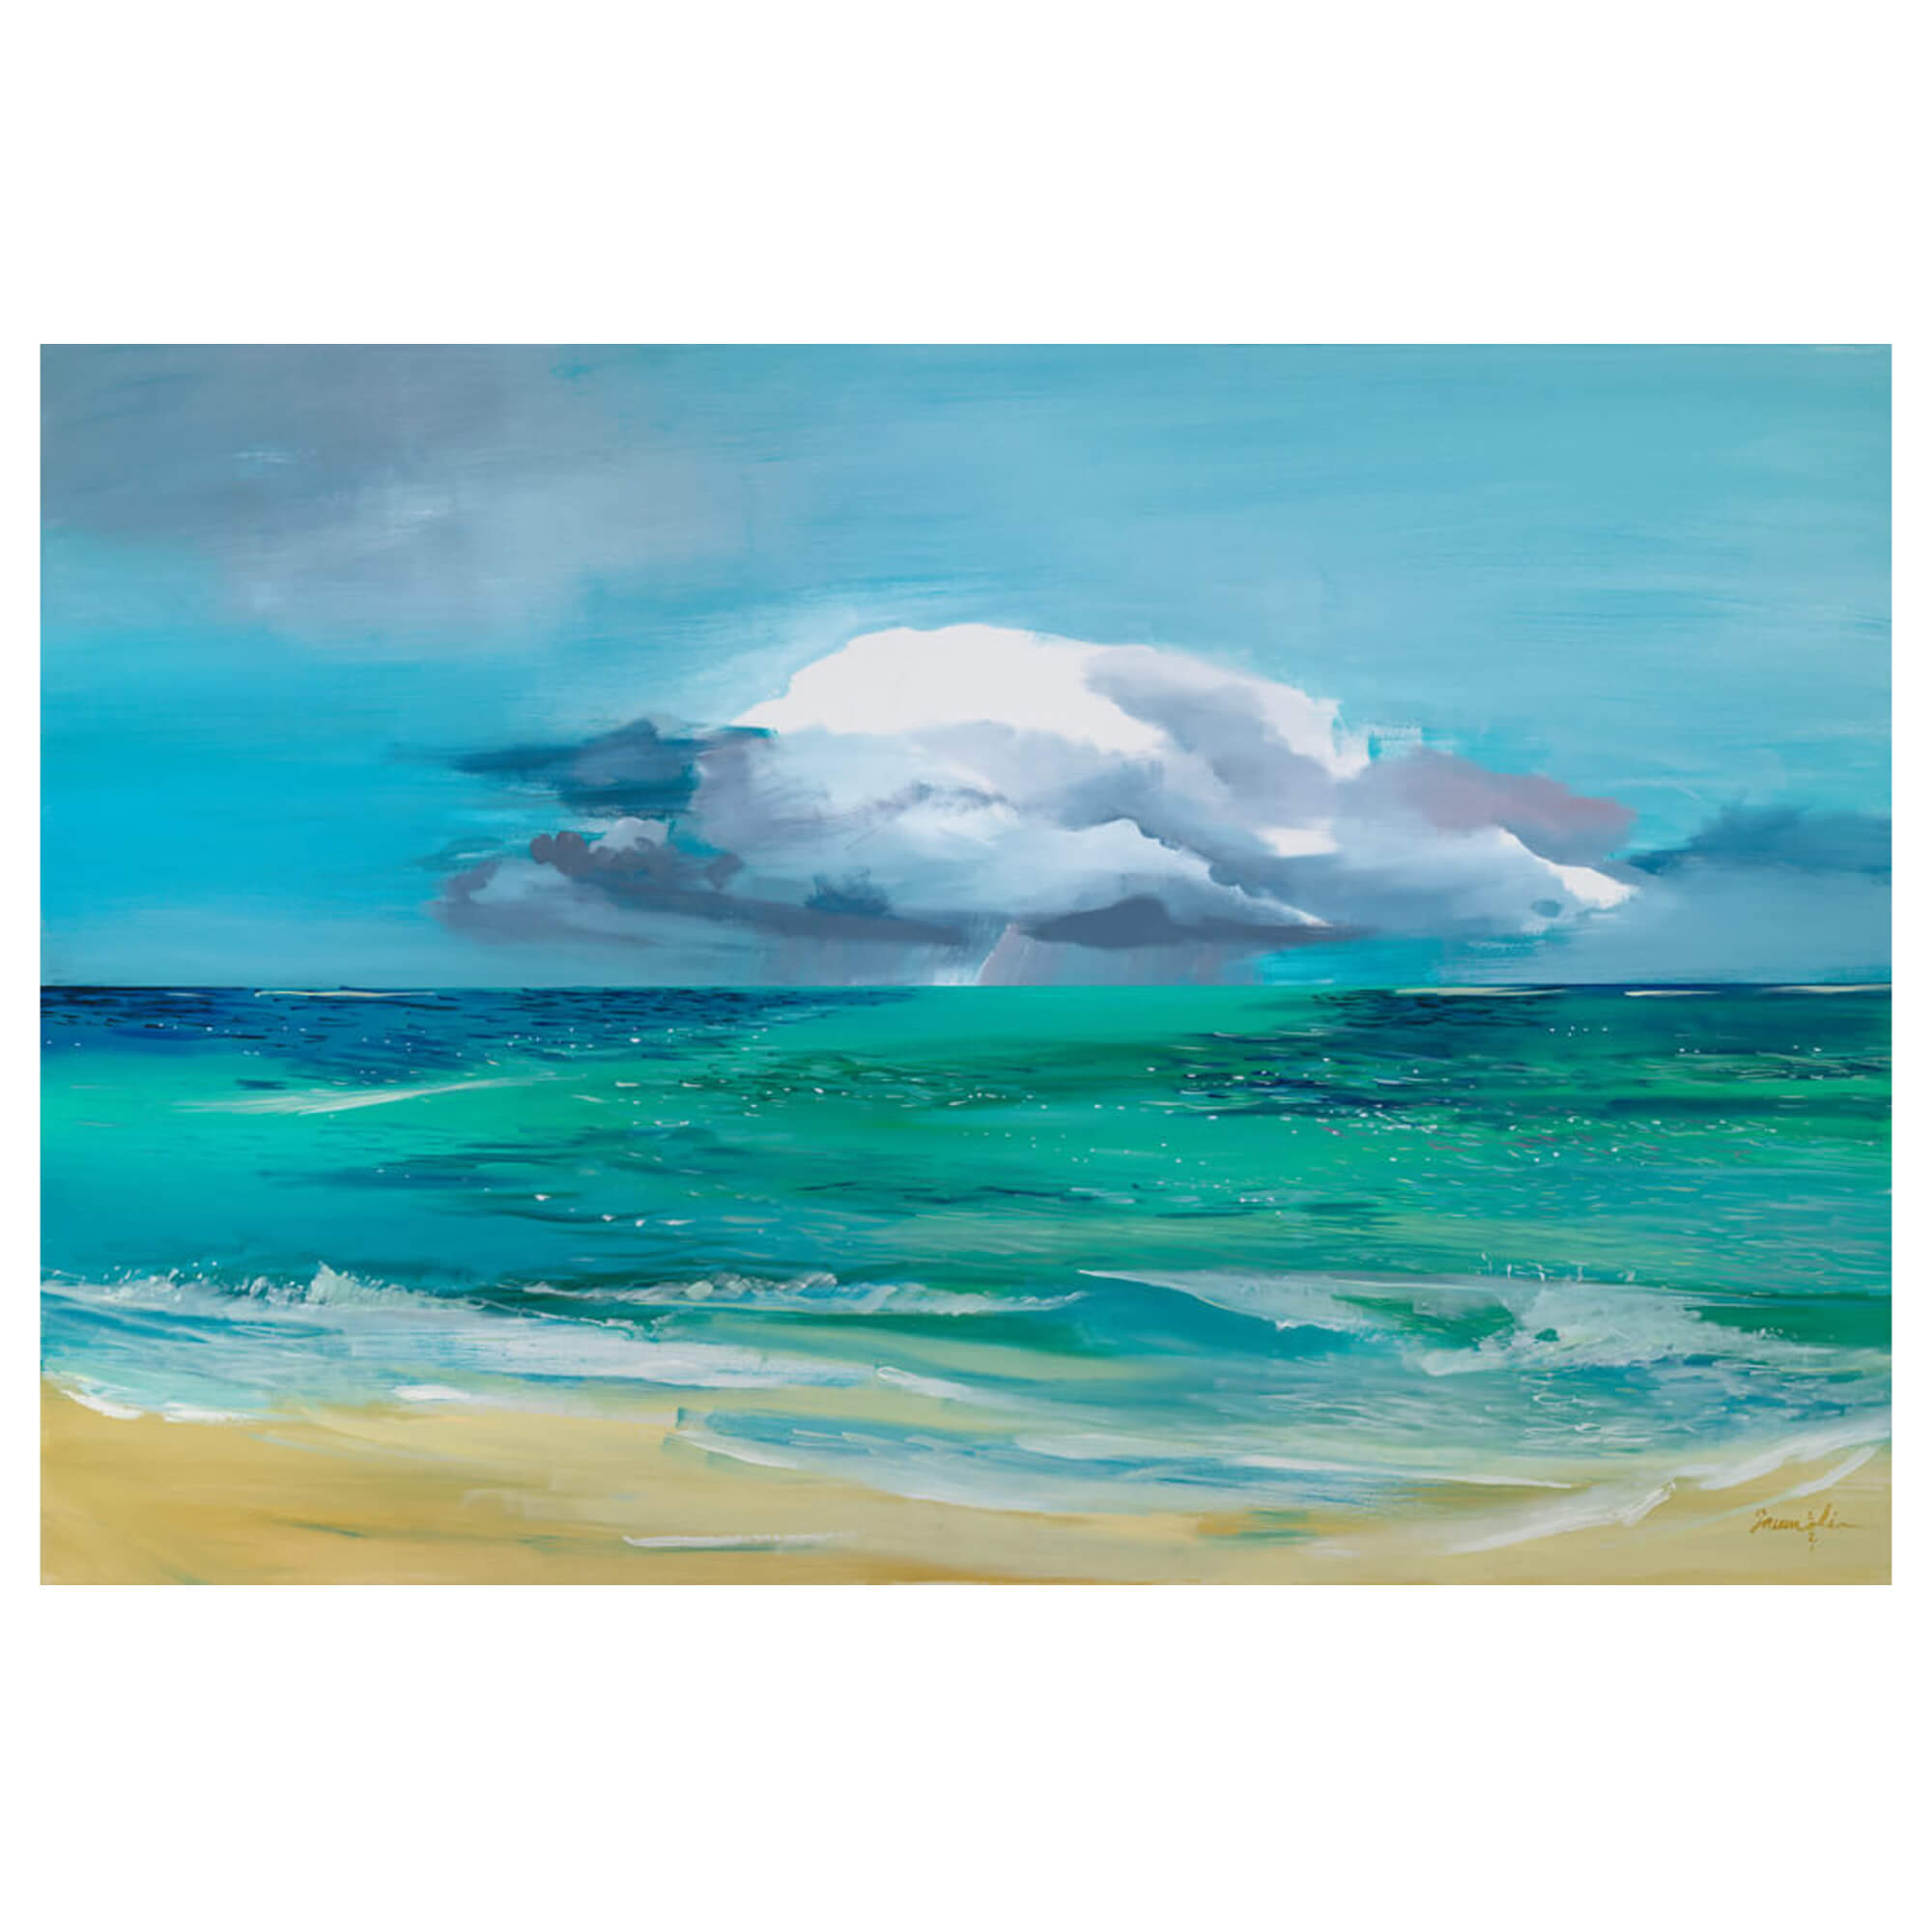 A metal art print depicting calm tranquil waters leading to a beach oasis by Hawaii artist Saumolia Puapuaga